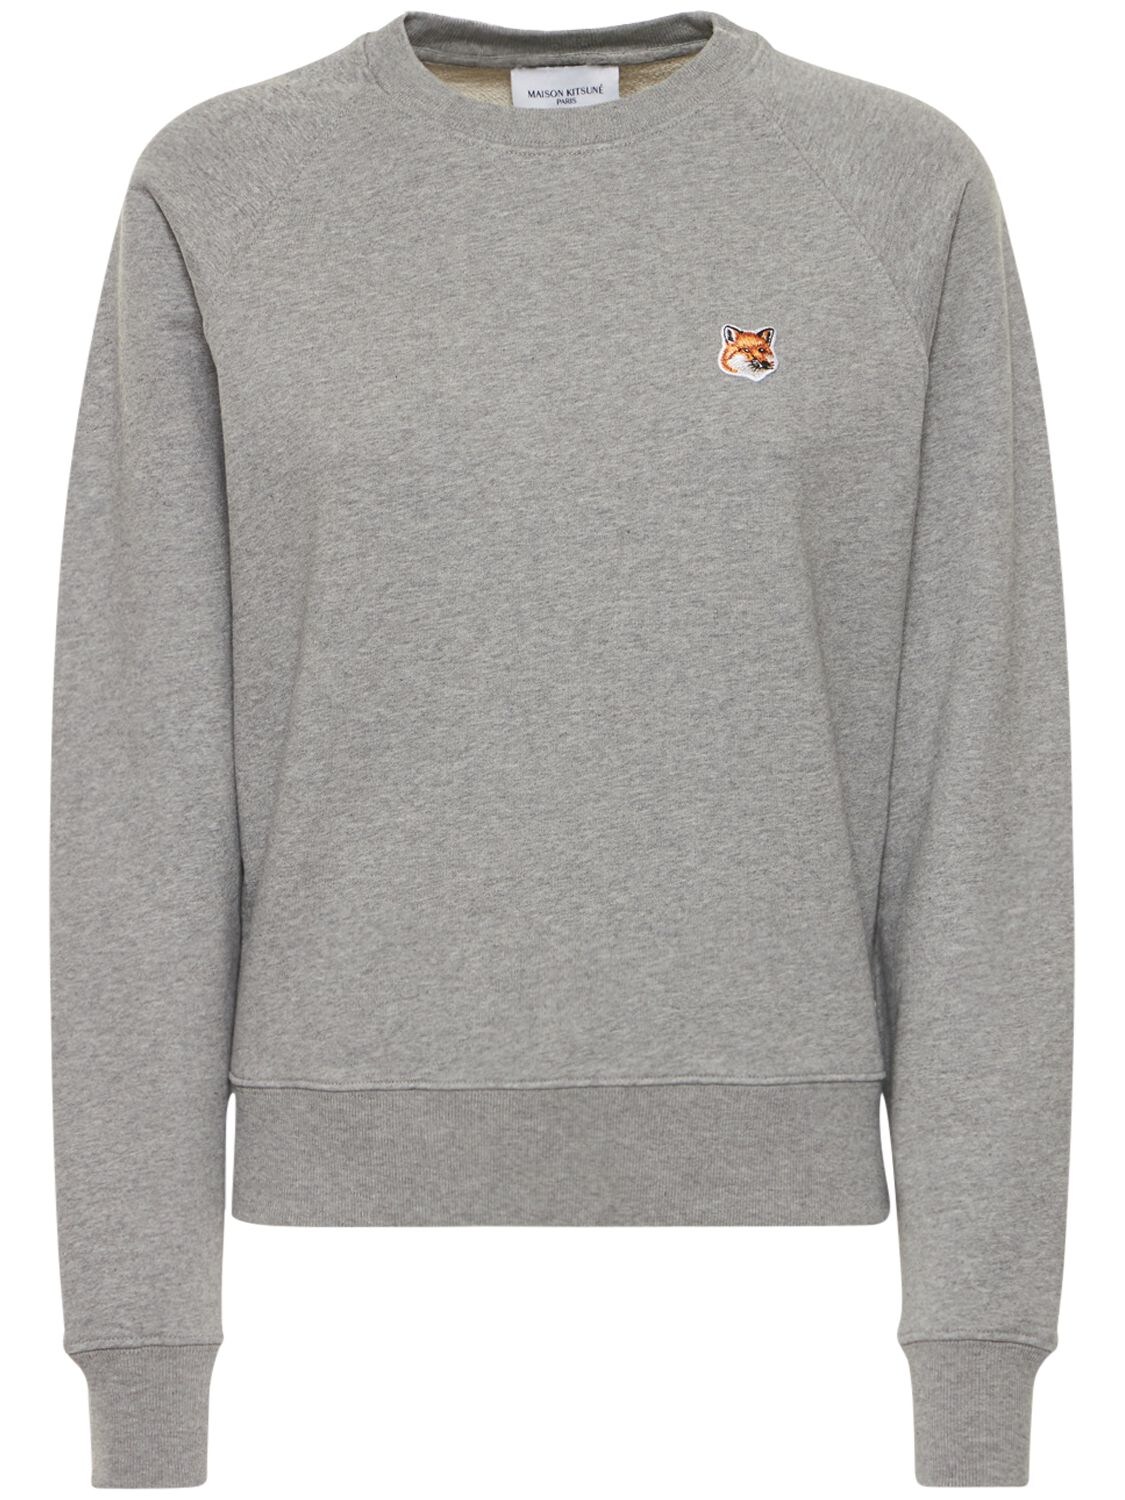 Cotton jersey sweatshirt with patch in grey